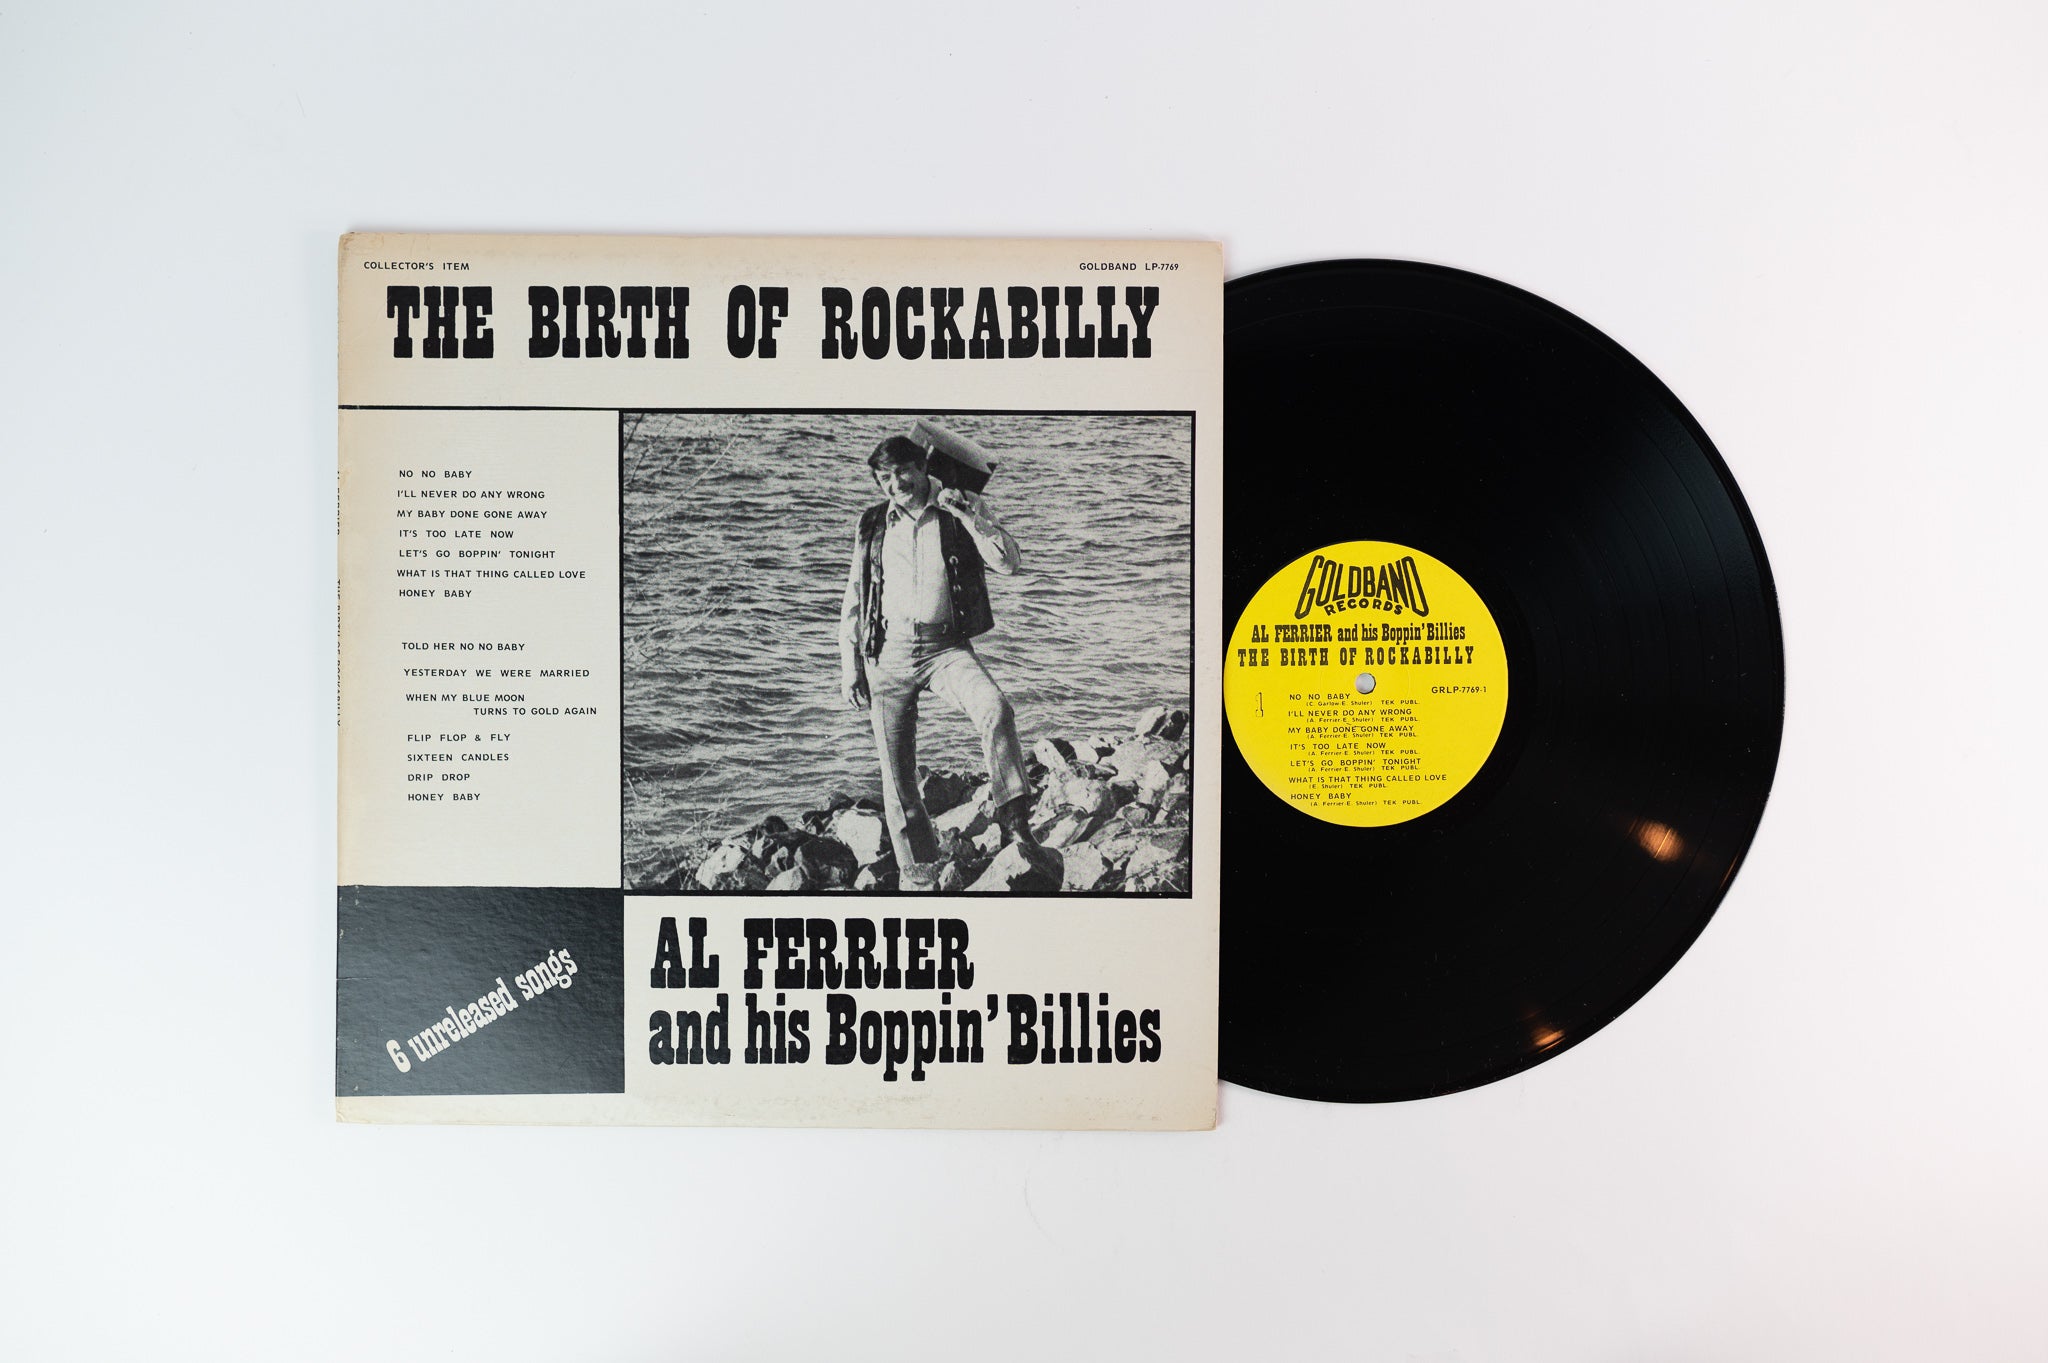 Al Ferrier And His Boppin' Billies - The Birth Of Rockabilly on Goldband